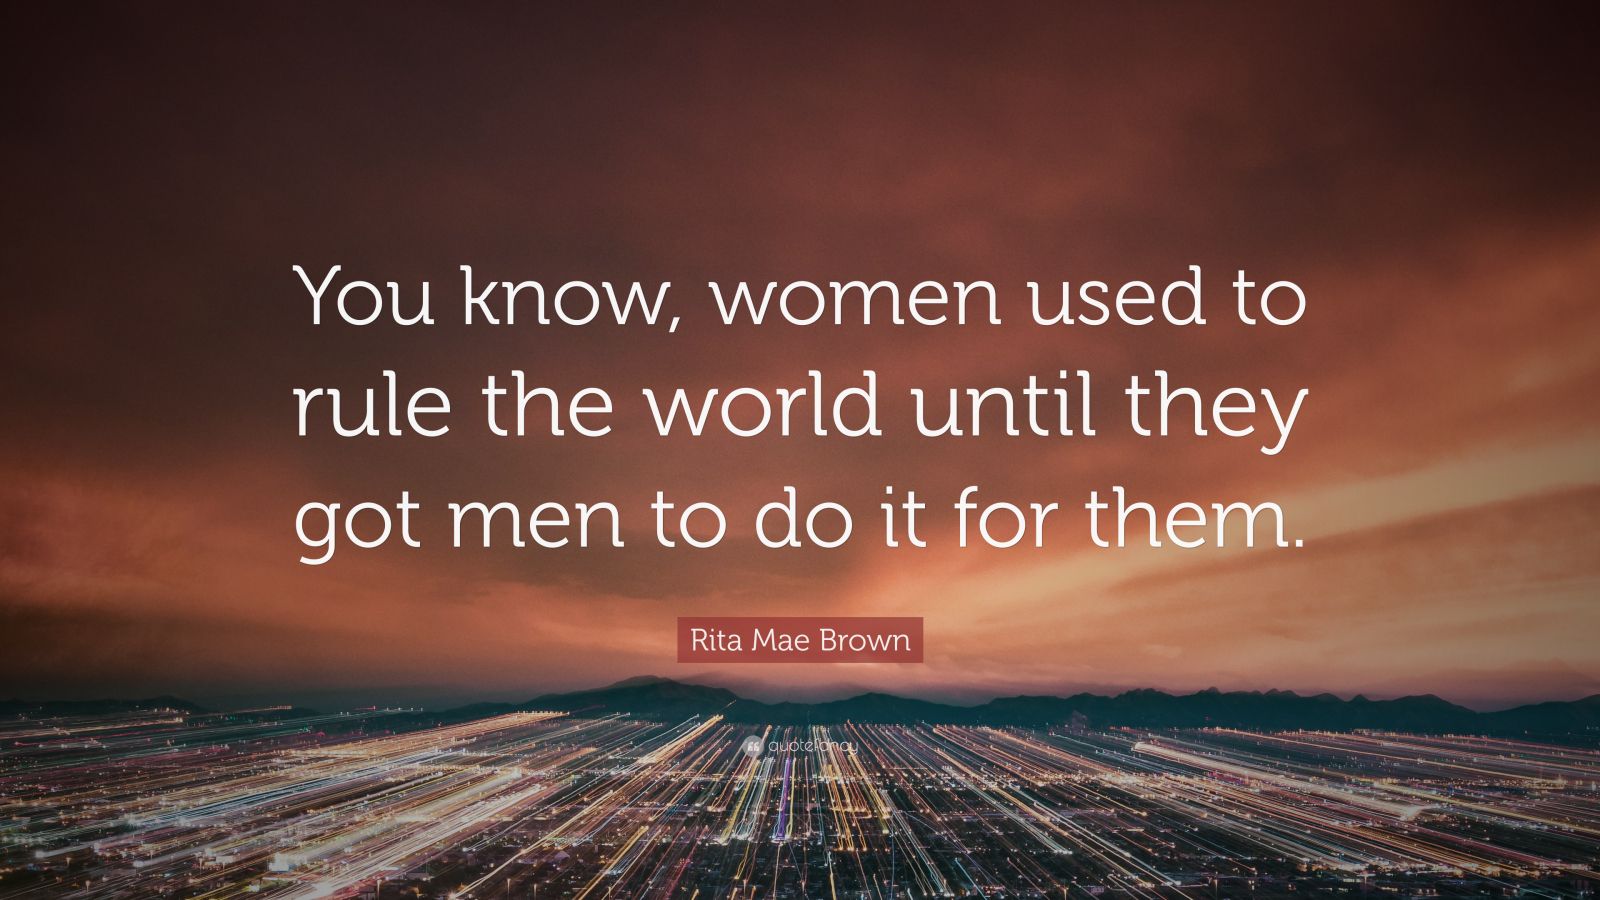 Rita Mae Brown Quote: “You know, women used to rule the world until ...